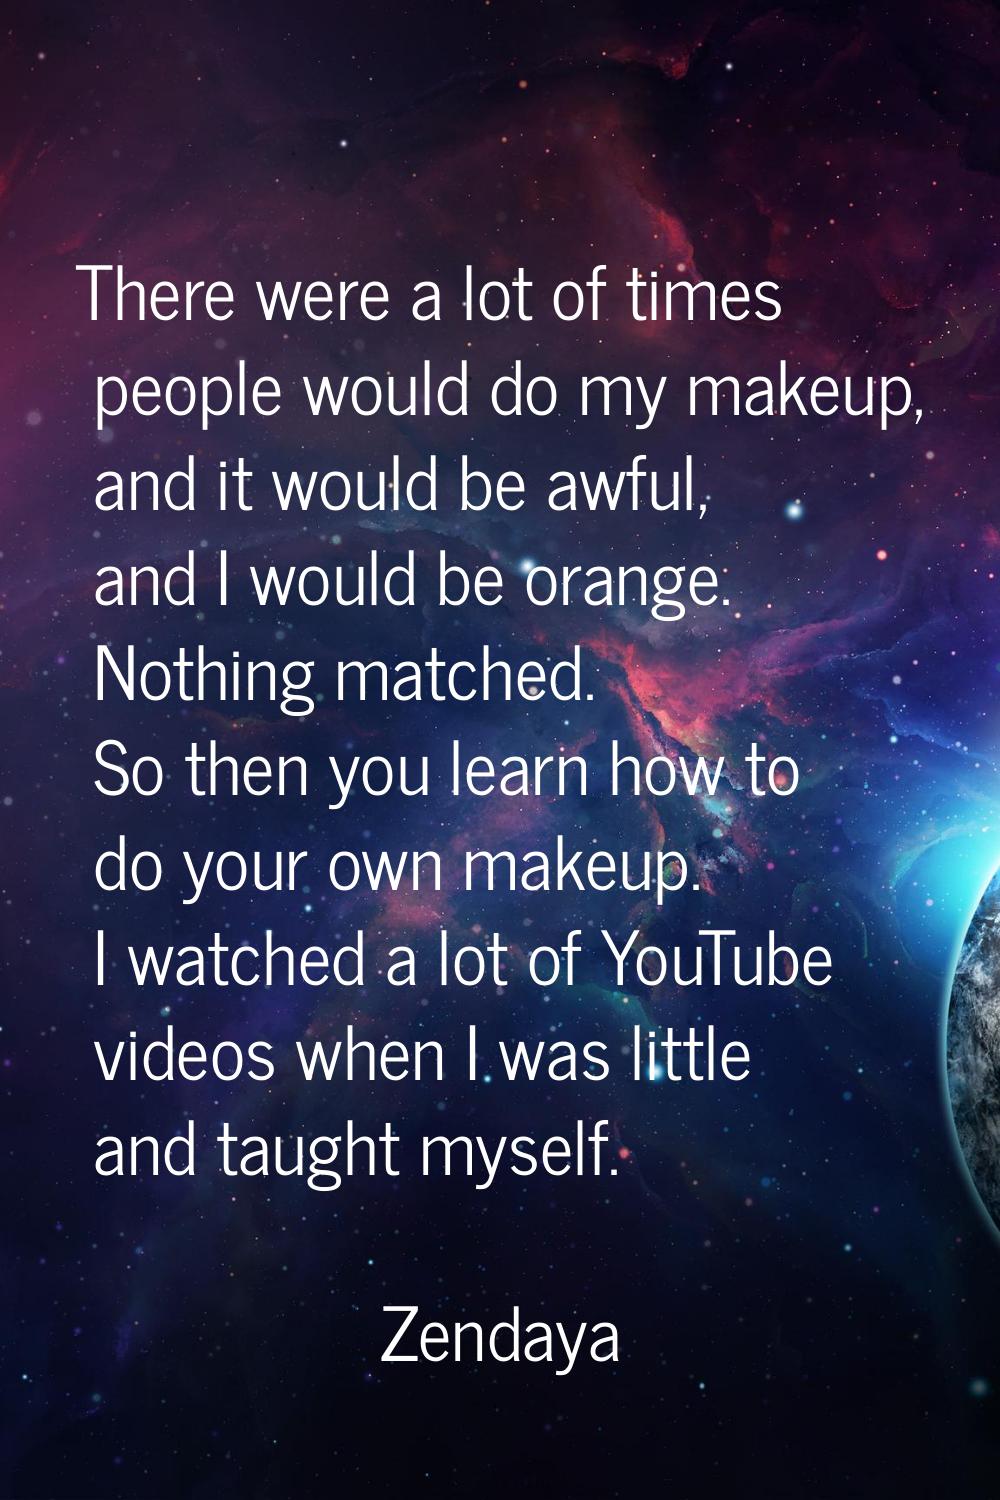 There were a lot of times people would do my makeup, and it would be awful, and I would be orange. 